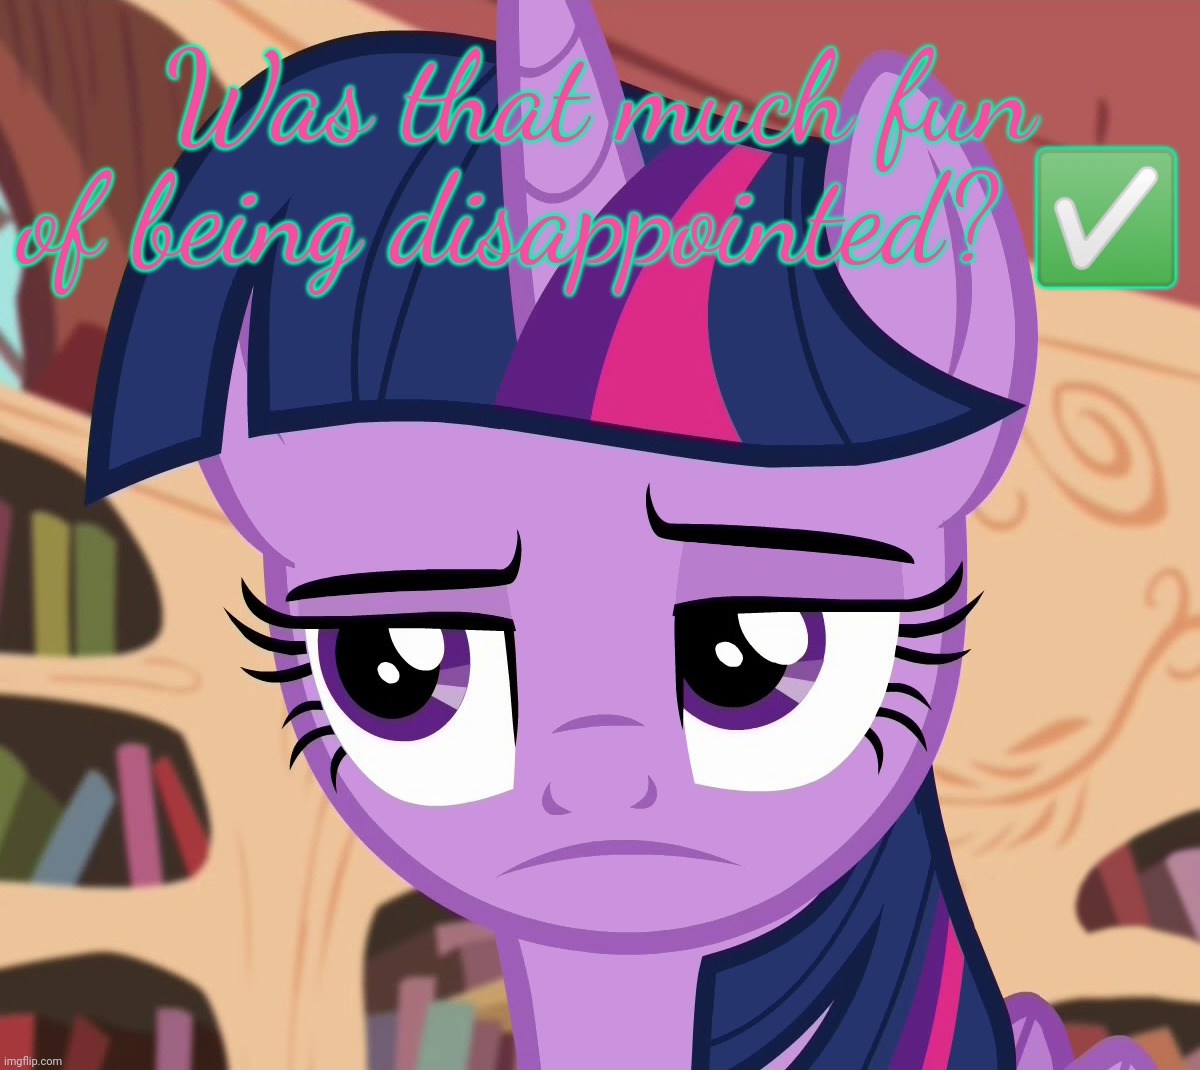 Unamused Twilight Sparkle (MLP) | Was that much fun of being disappointed? ✅ | image tagged in unamused twilight sparkle mlp,disappointed,funny,memes,rage comics,twilight sparkle | made w/ Imgflip meme maker